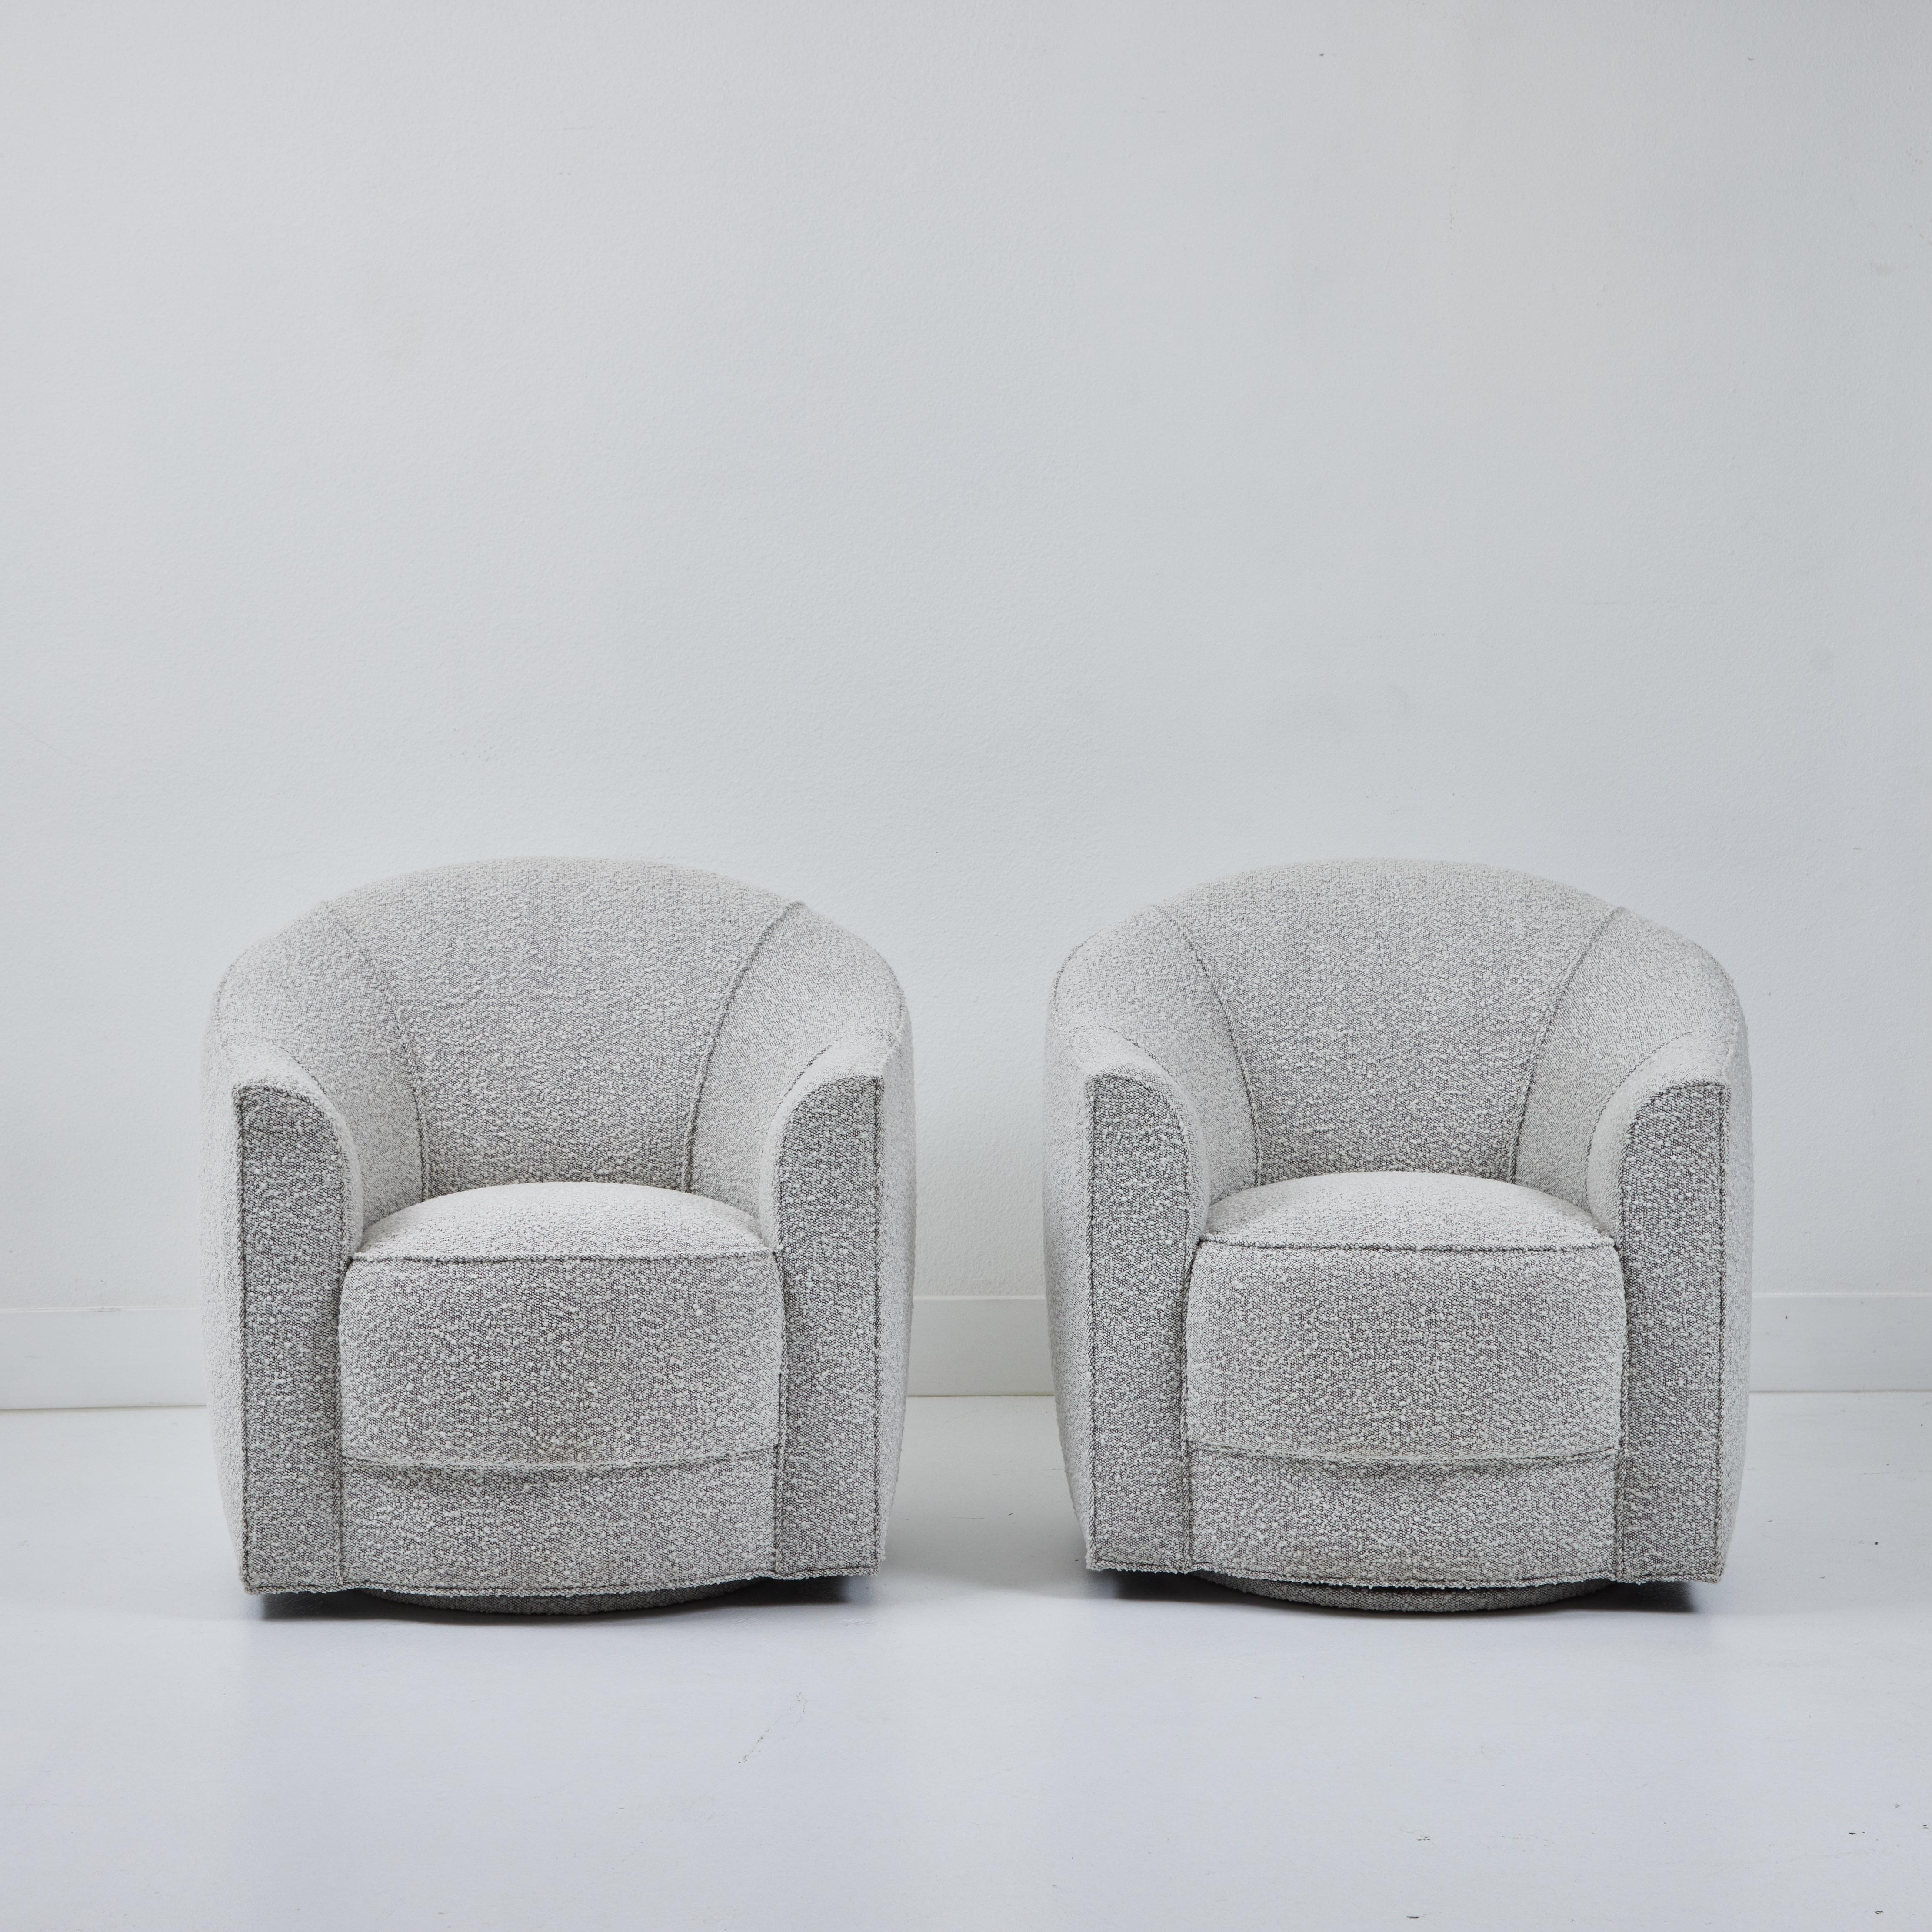 These two newly restored swiveling club chairs came from the estate of Don Rickles.    The chairs have been rebuilt and are reupholstered in a beautiful cream bouclé with grey undertones. These chairs are incredibly comfortable. They are as sturdy